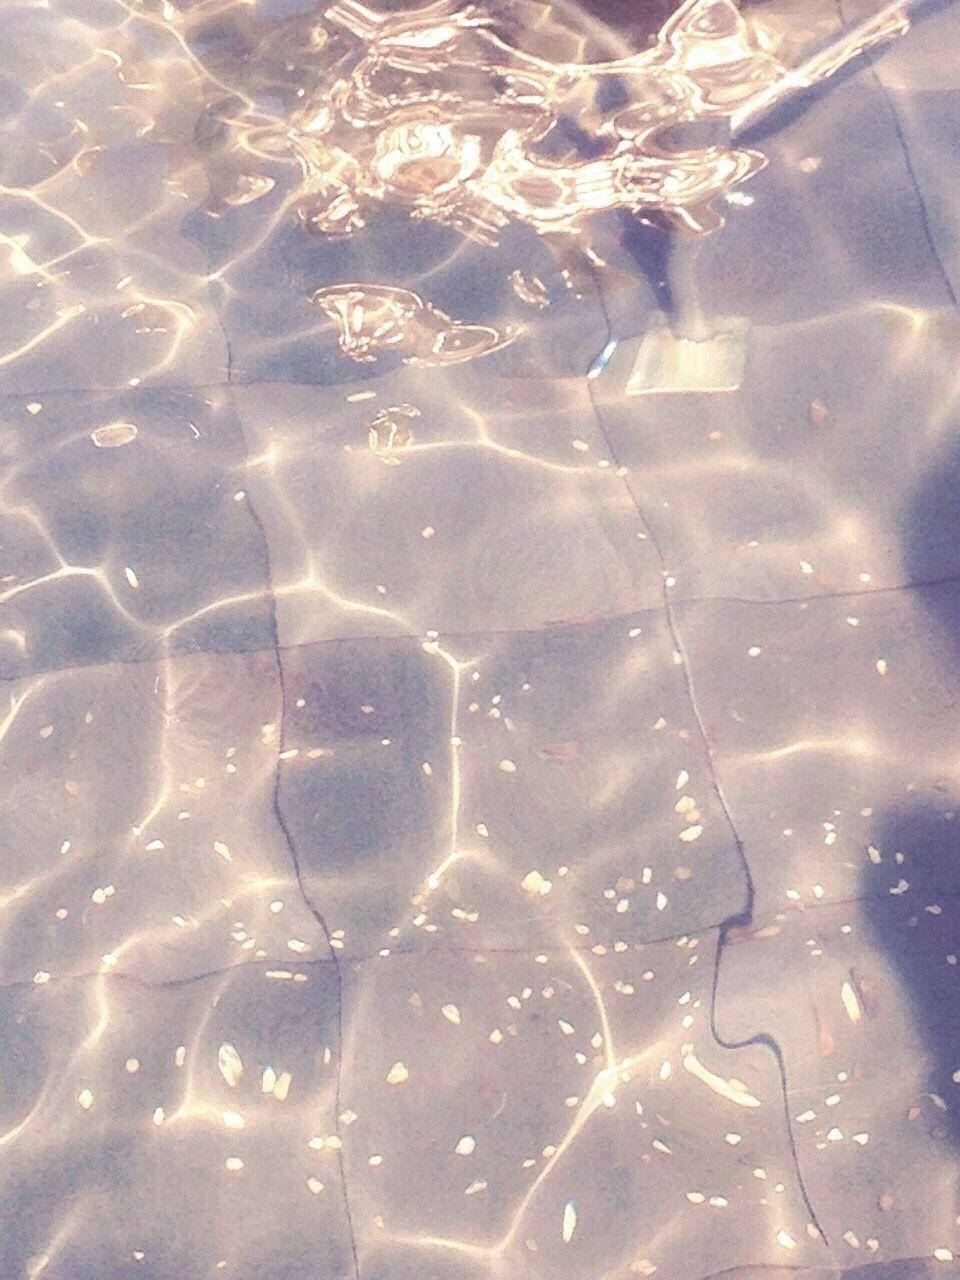 The sun reflecting off the water in a pool - Water, underwater